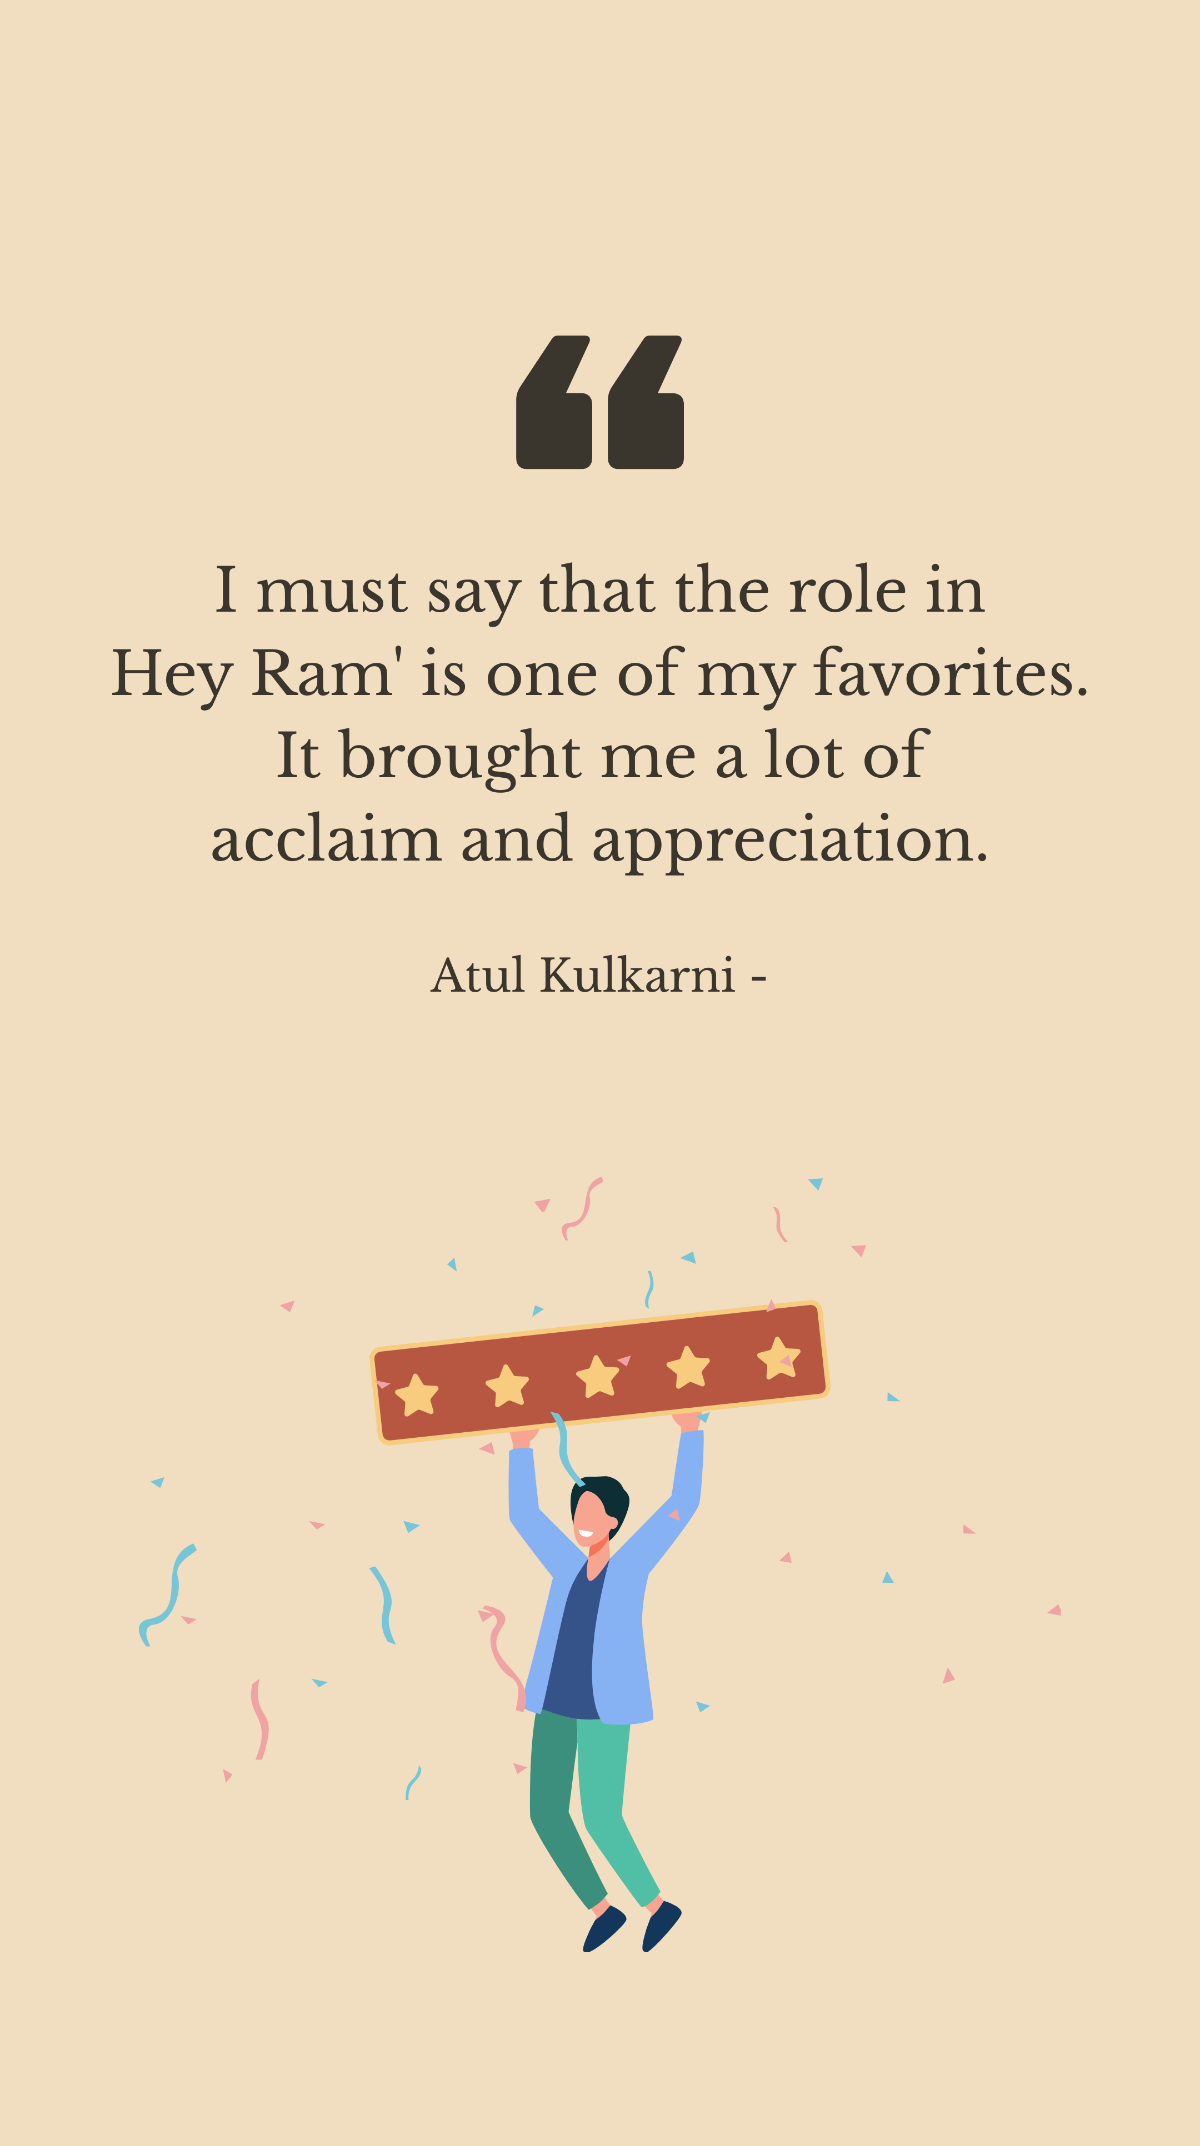 Atul Kulkarni - I must say that the role in Hey Ram' is one of my favorites. It brought me a lot of acclaim and appreciation.